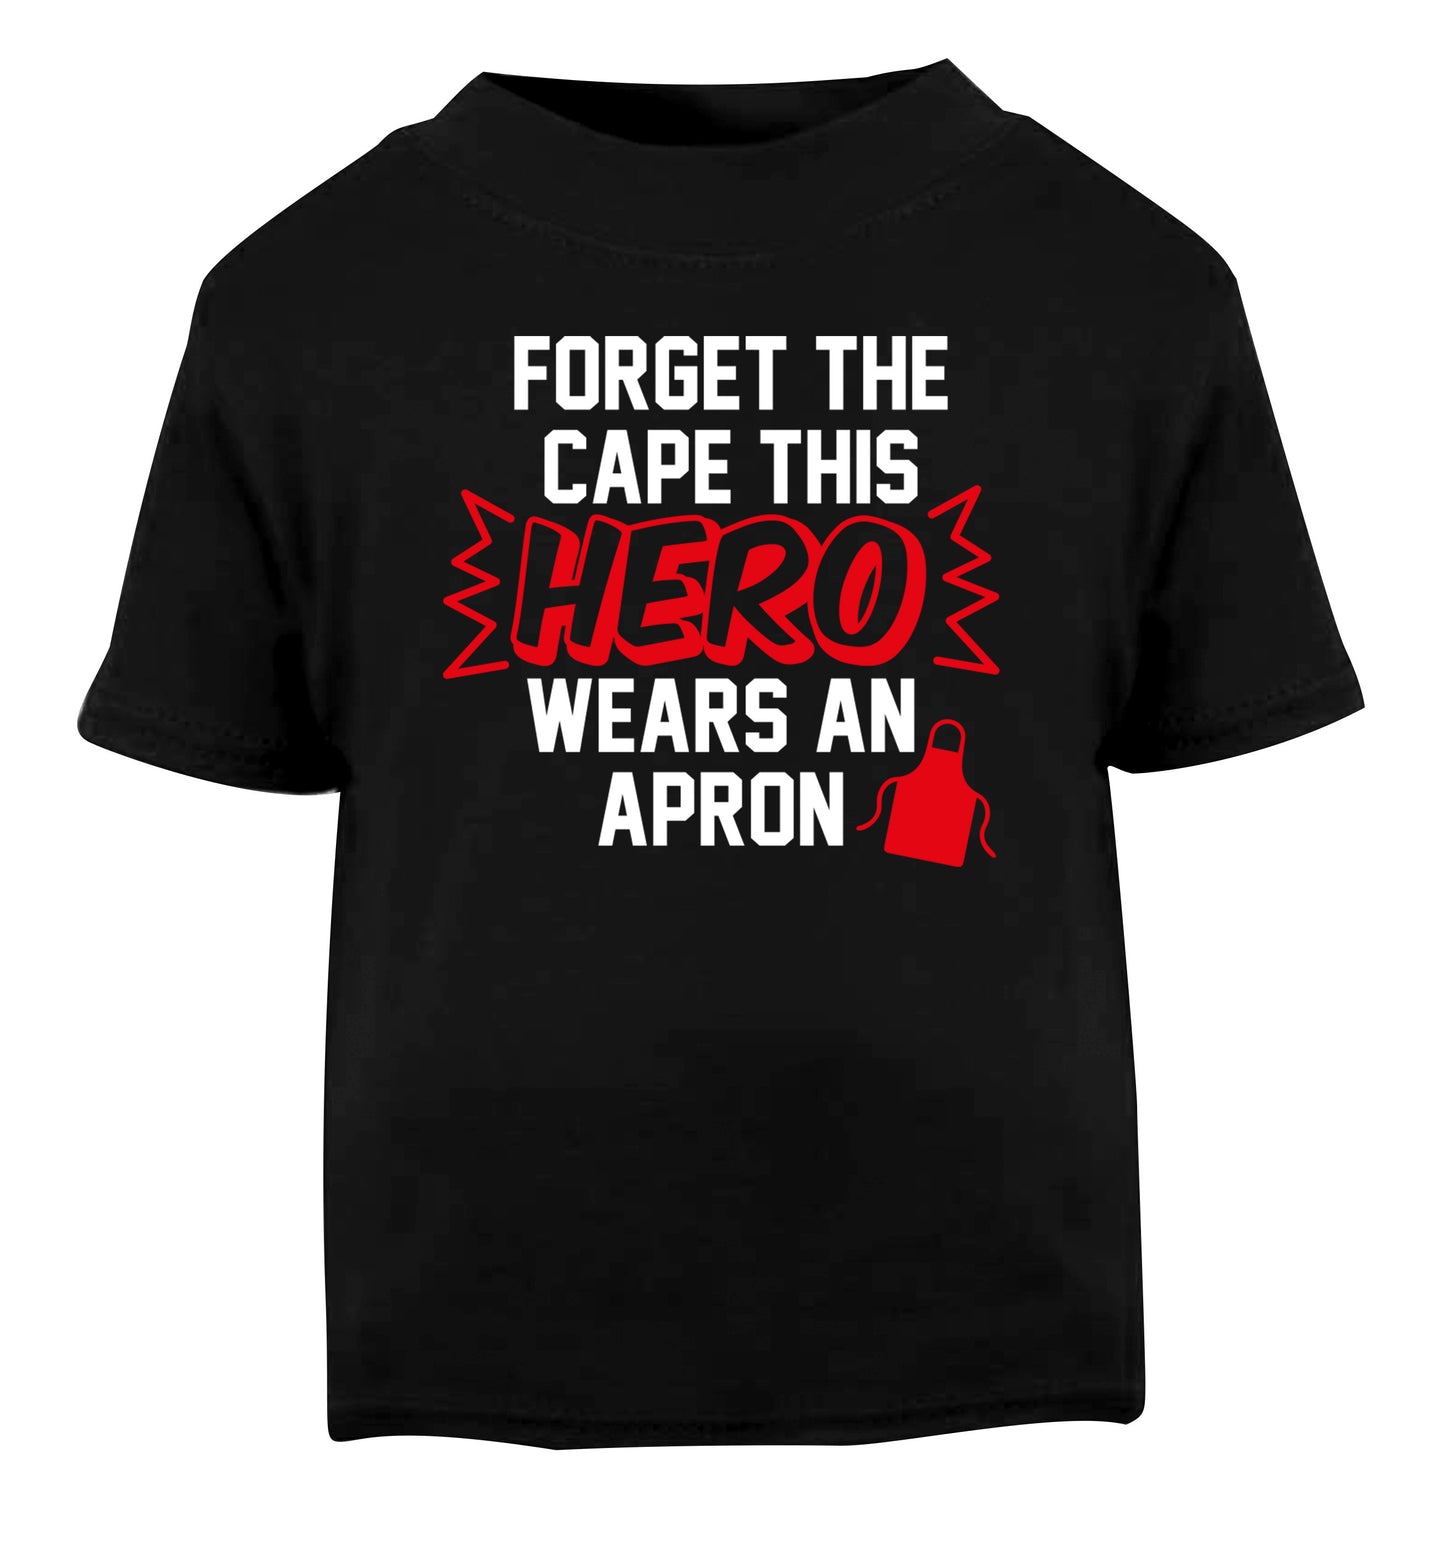 Forget the cape this hero wears an apron Black Baby Toddler Tshirt 2 years